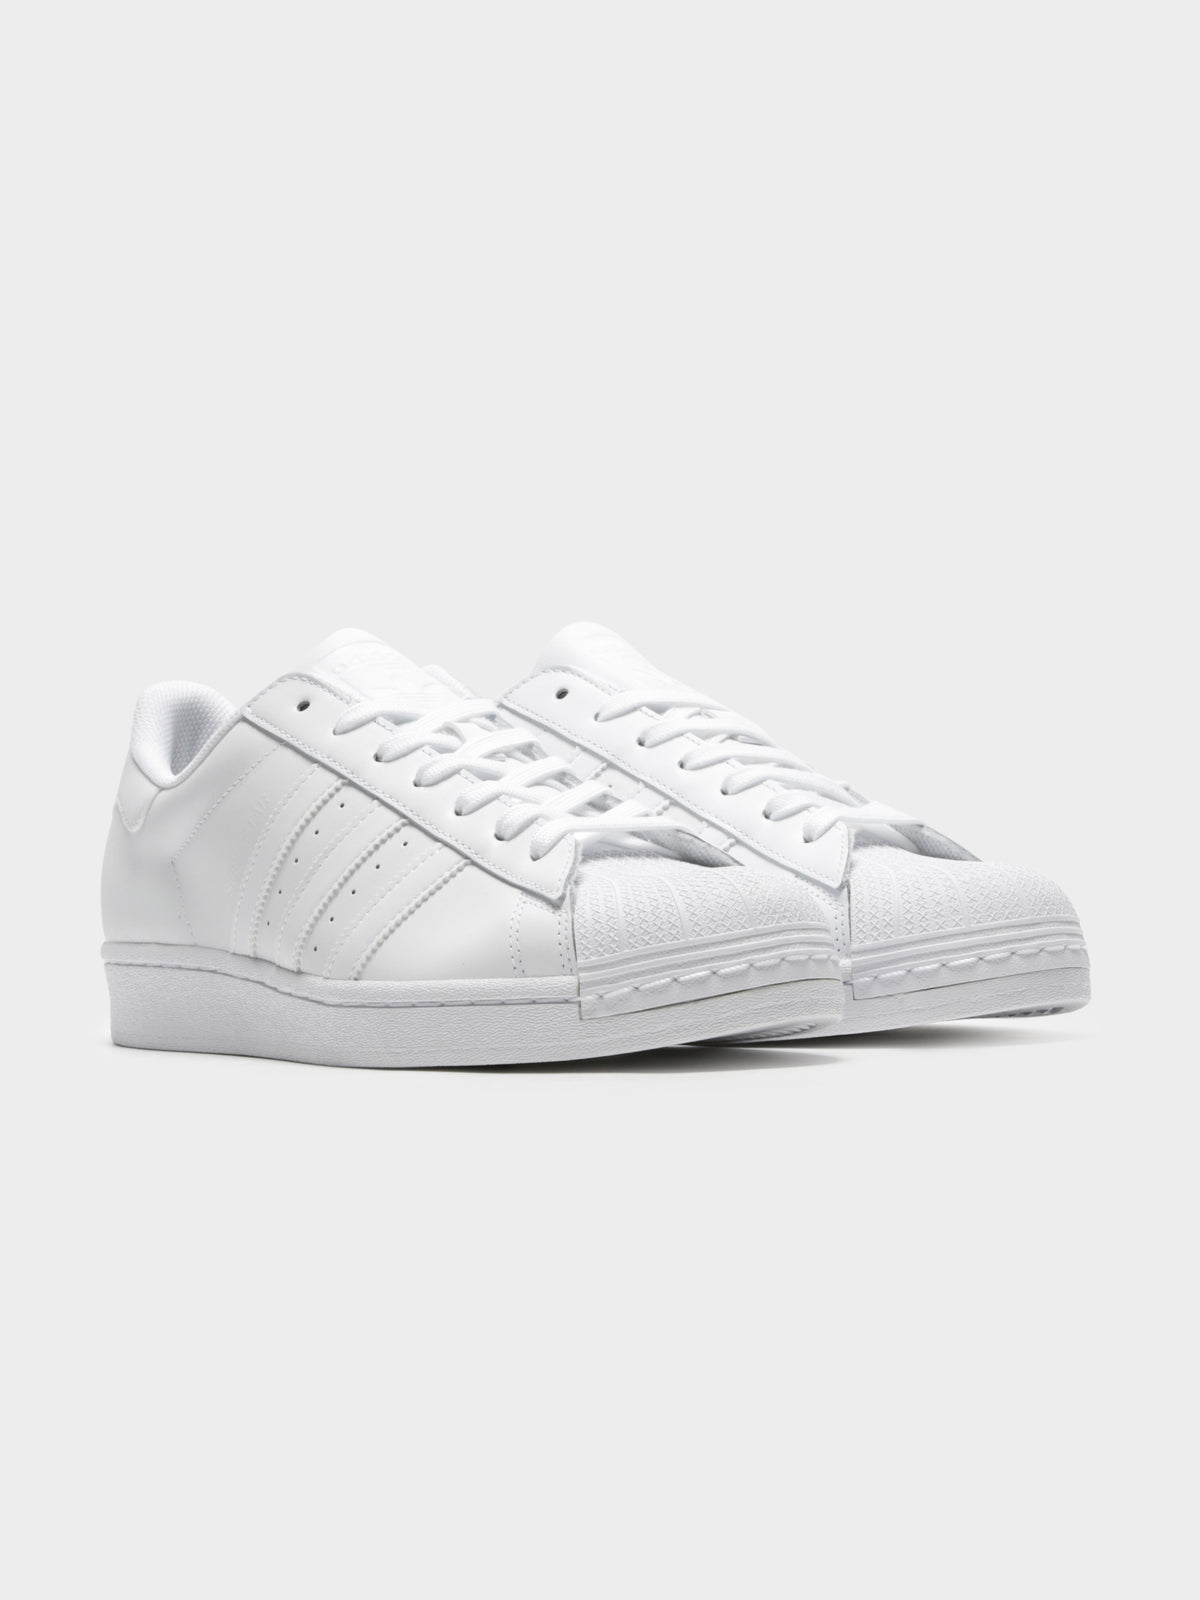 Unisex Superstar Sneakers in White